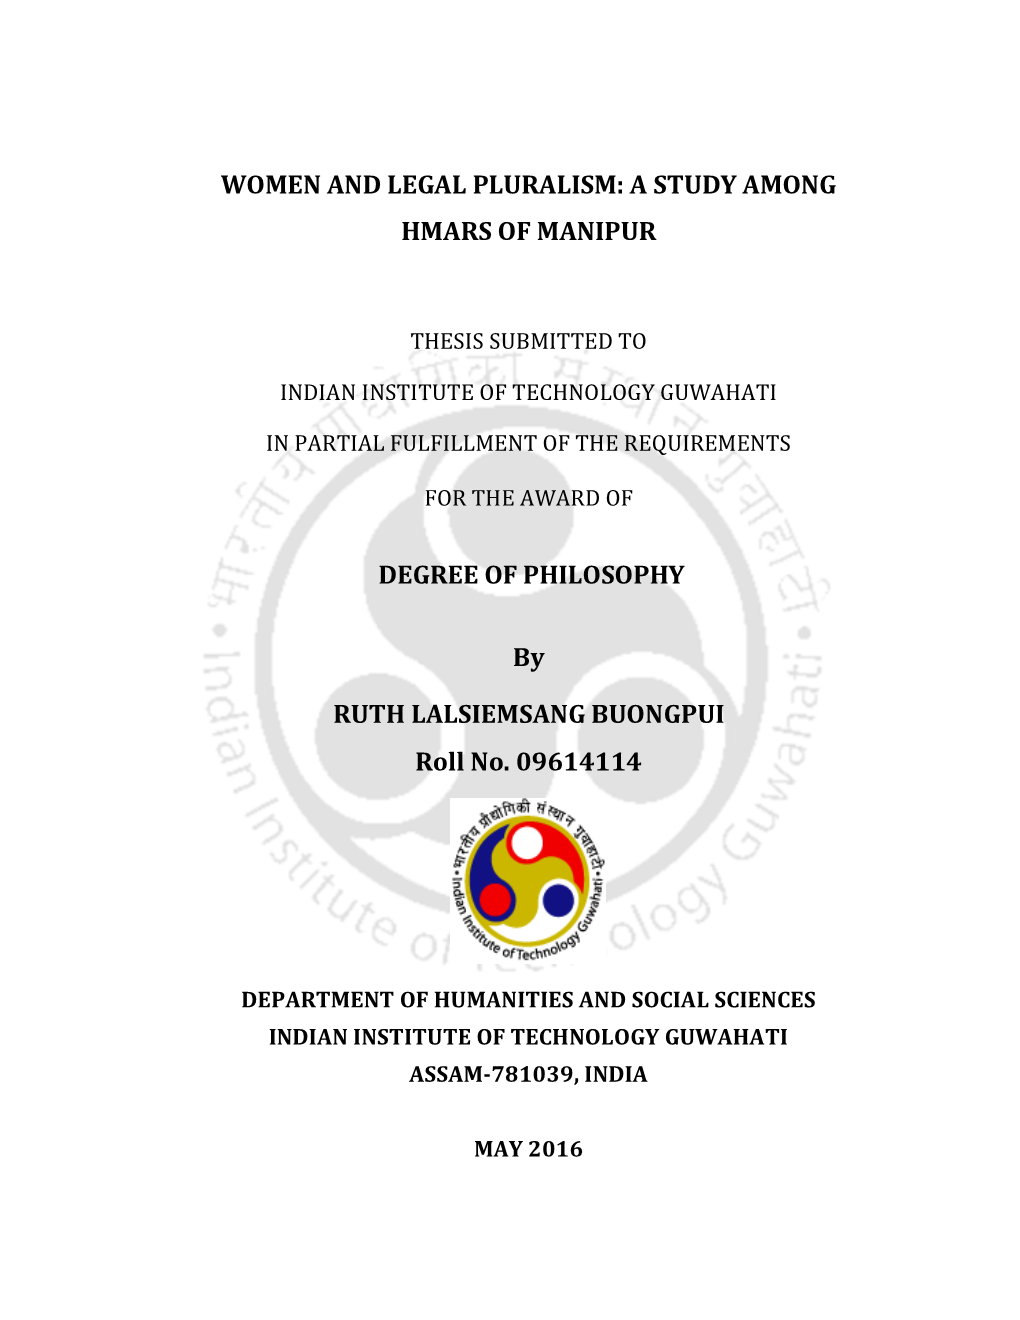 Women and Legal Pluralism: a Study Among Hmars of Manipur